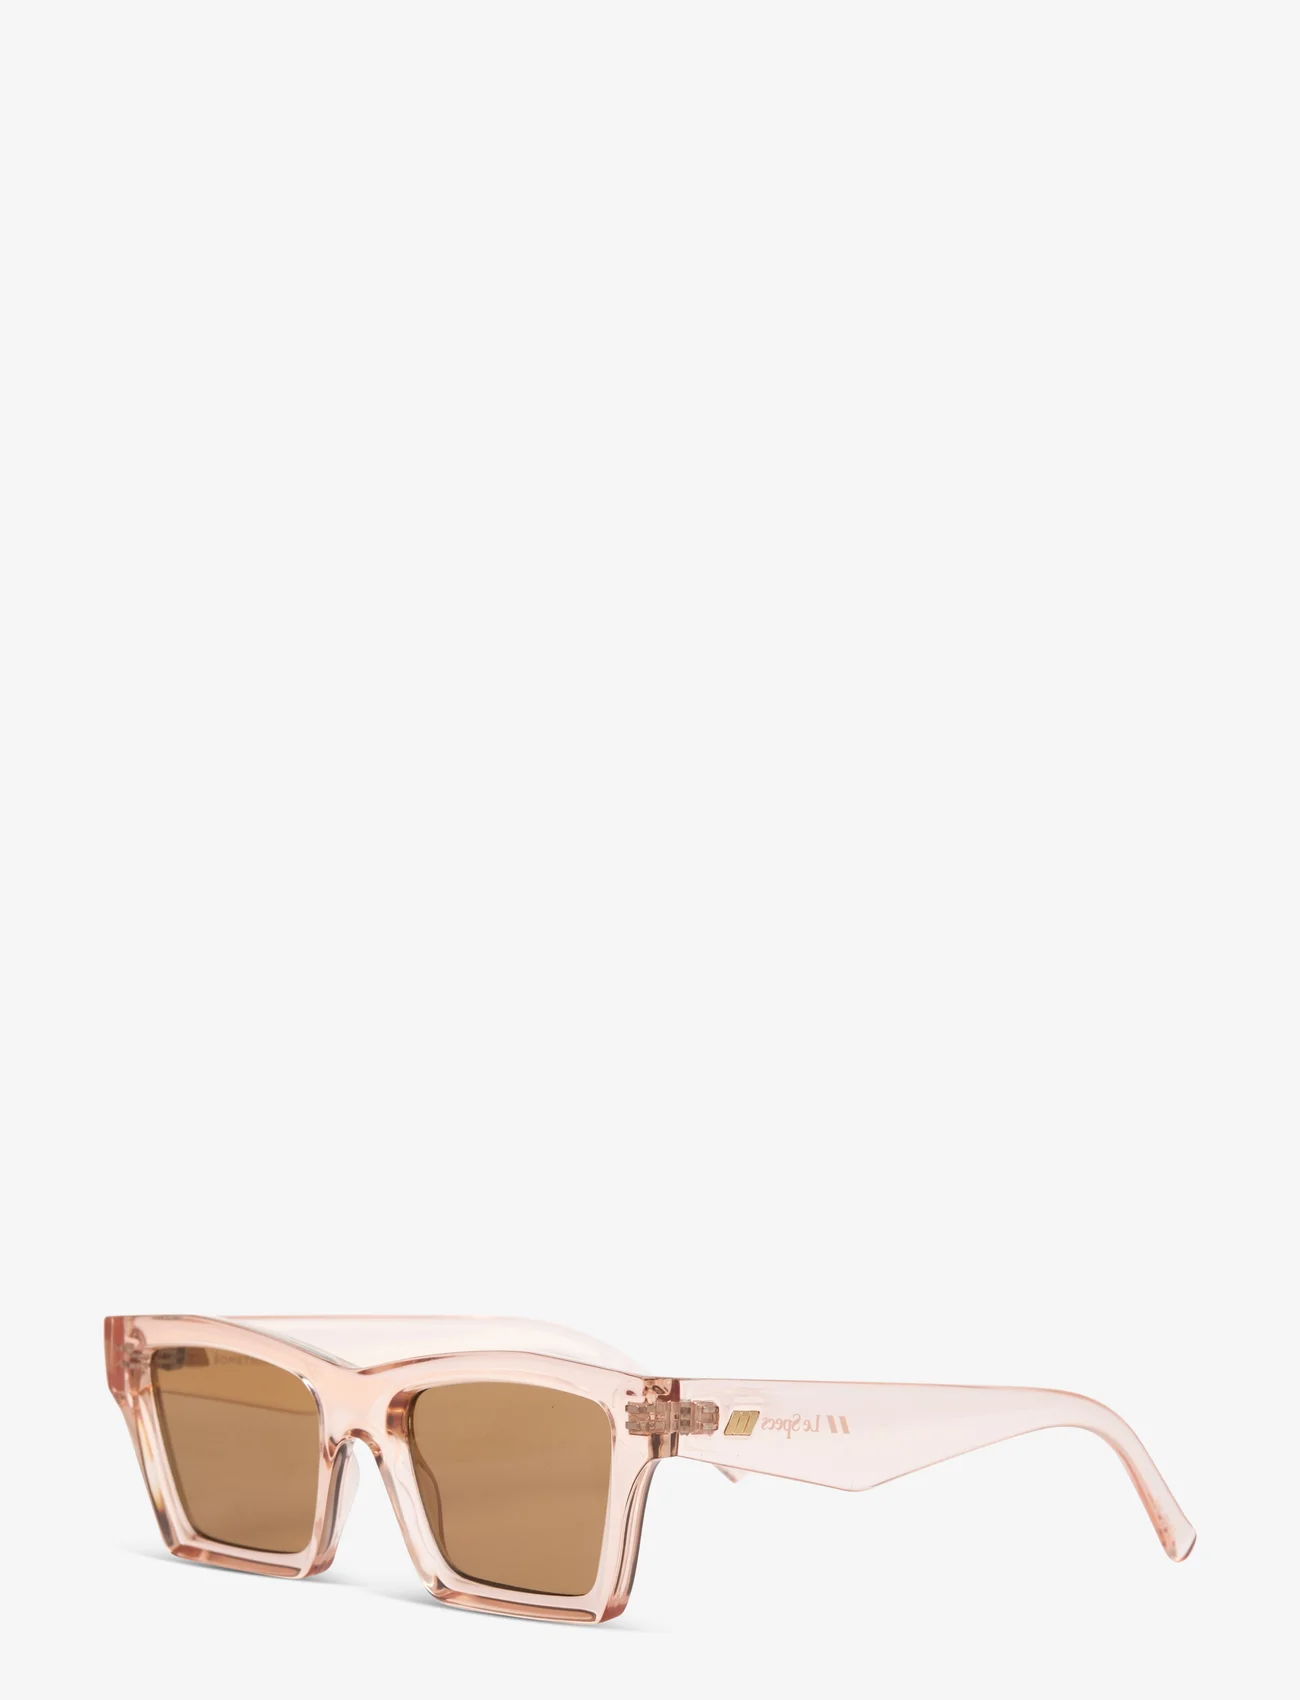 Le Specs - SOMETHING - pink champagne w/ tan tint lens - 1